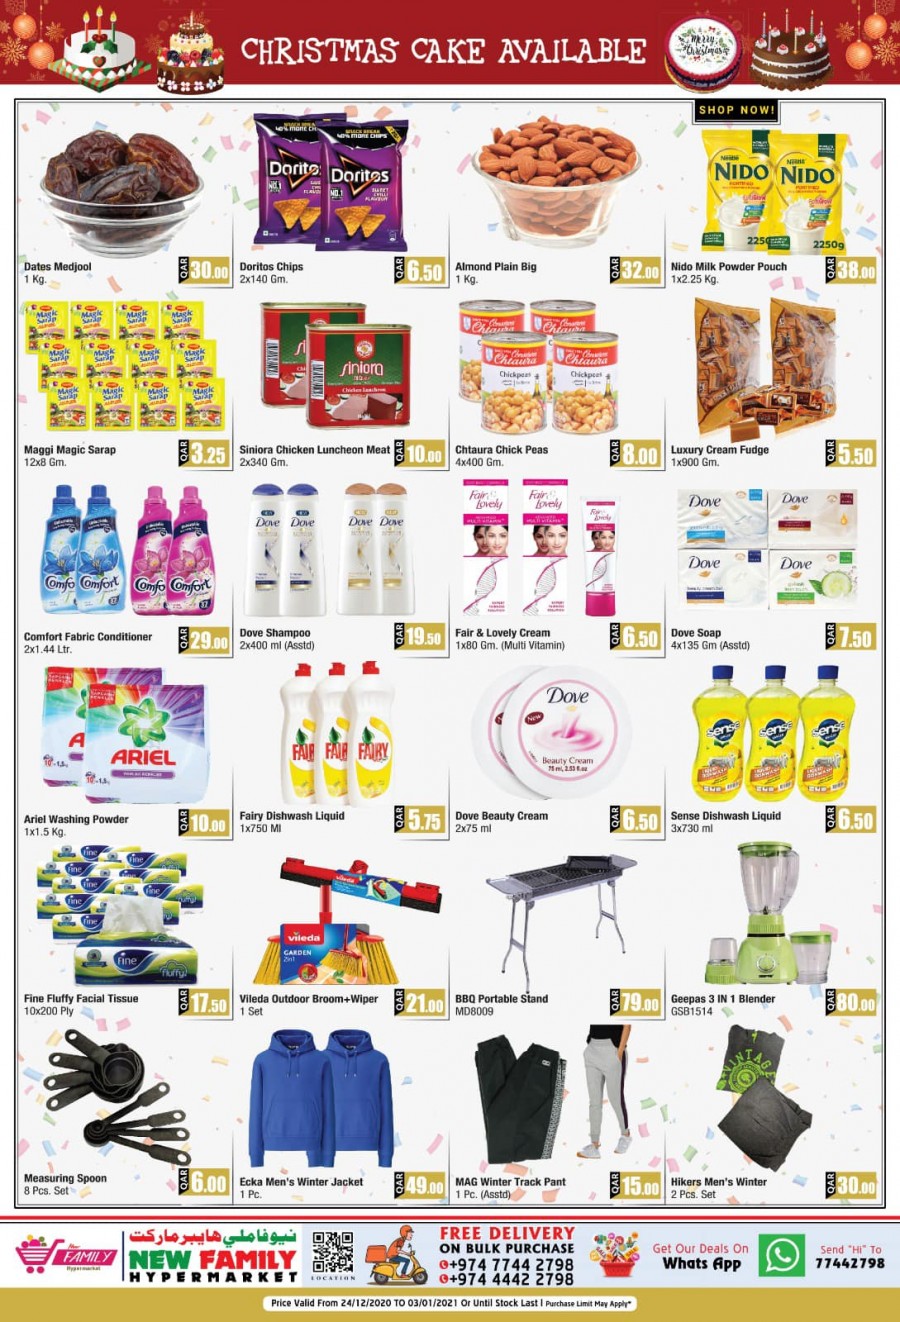 New Family Hypermarket New Year Offers